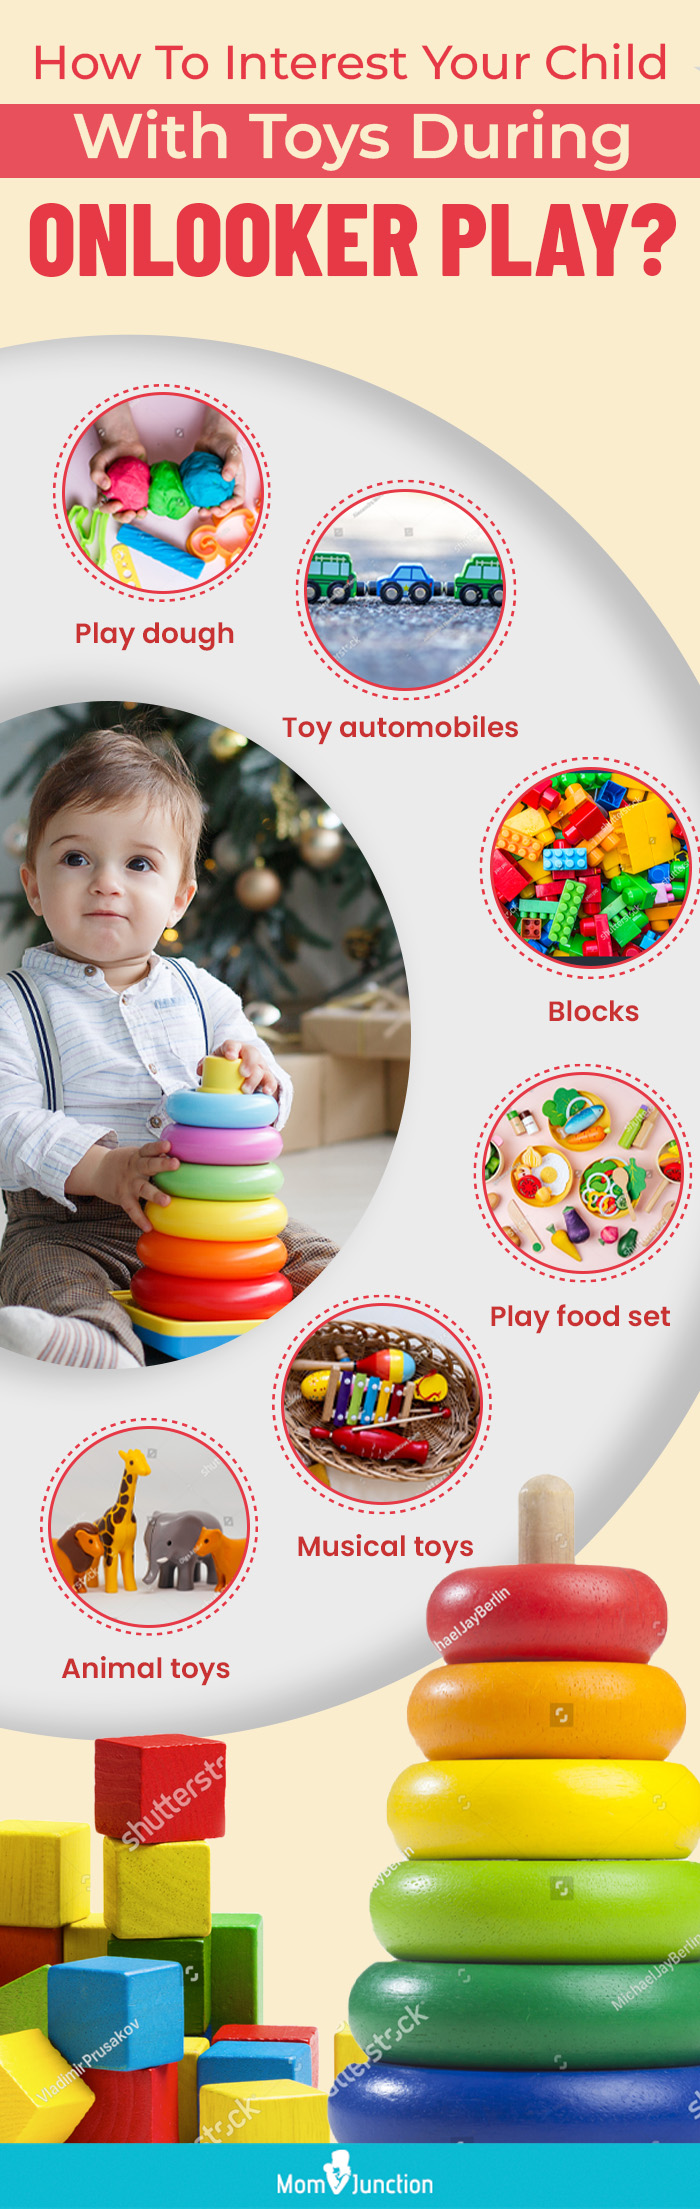 how to interest your child with toys during onlooker play (infographic)